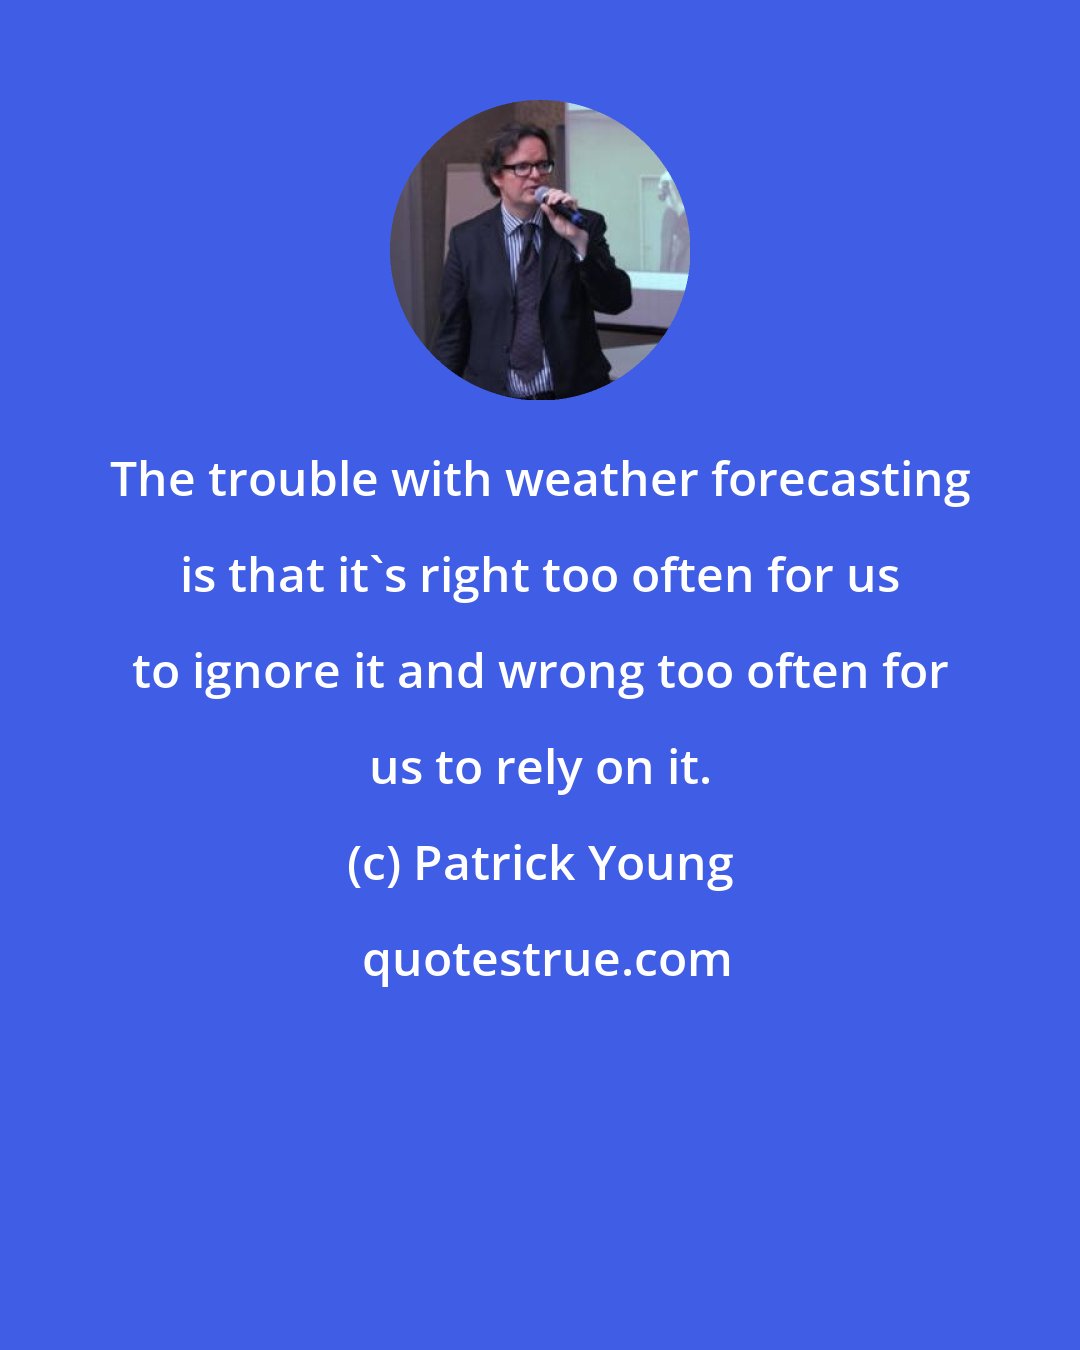 Patrick Young: The trouble with weather forecasting is that it's right too often for us to ignore it and wrong too often for us to rely on it.